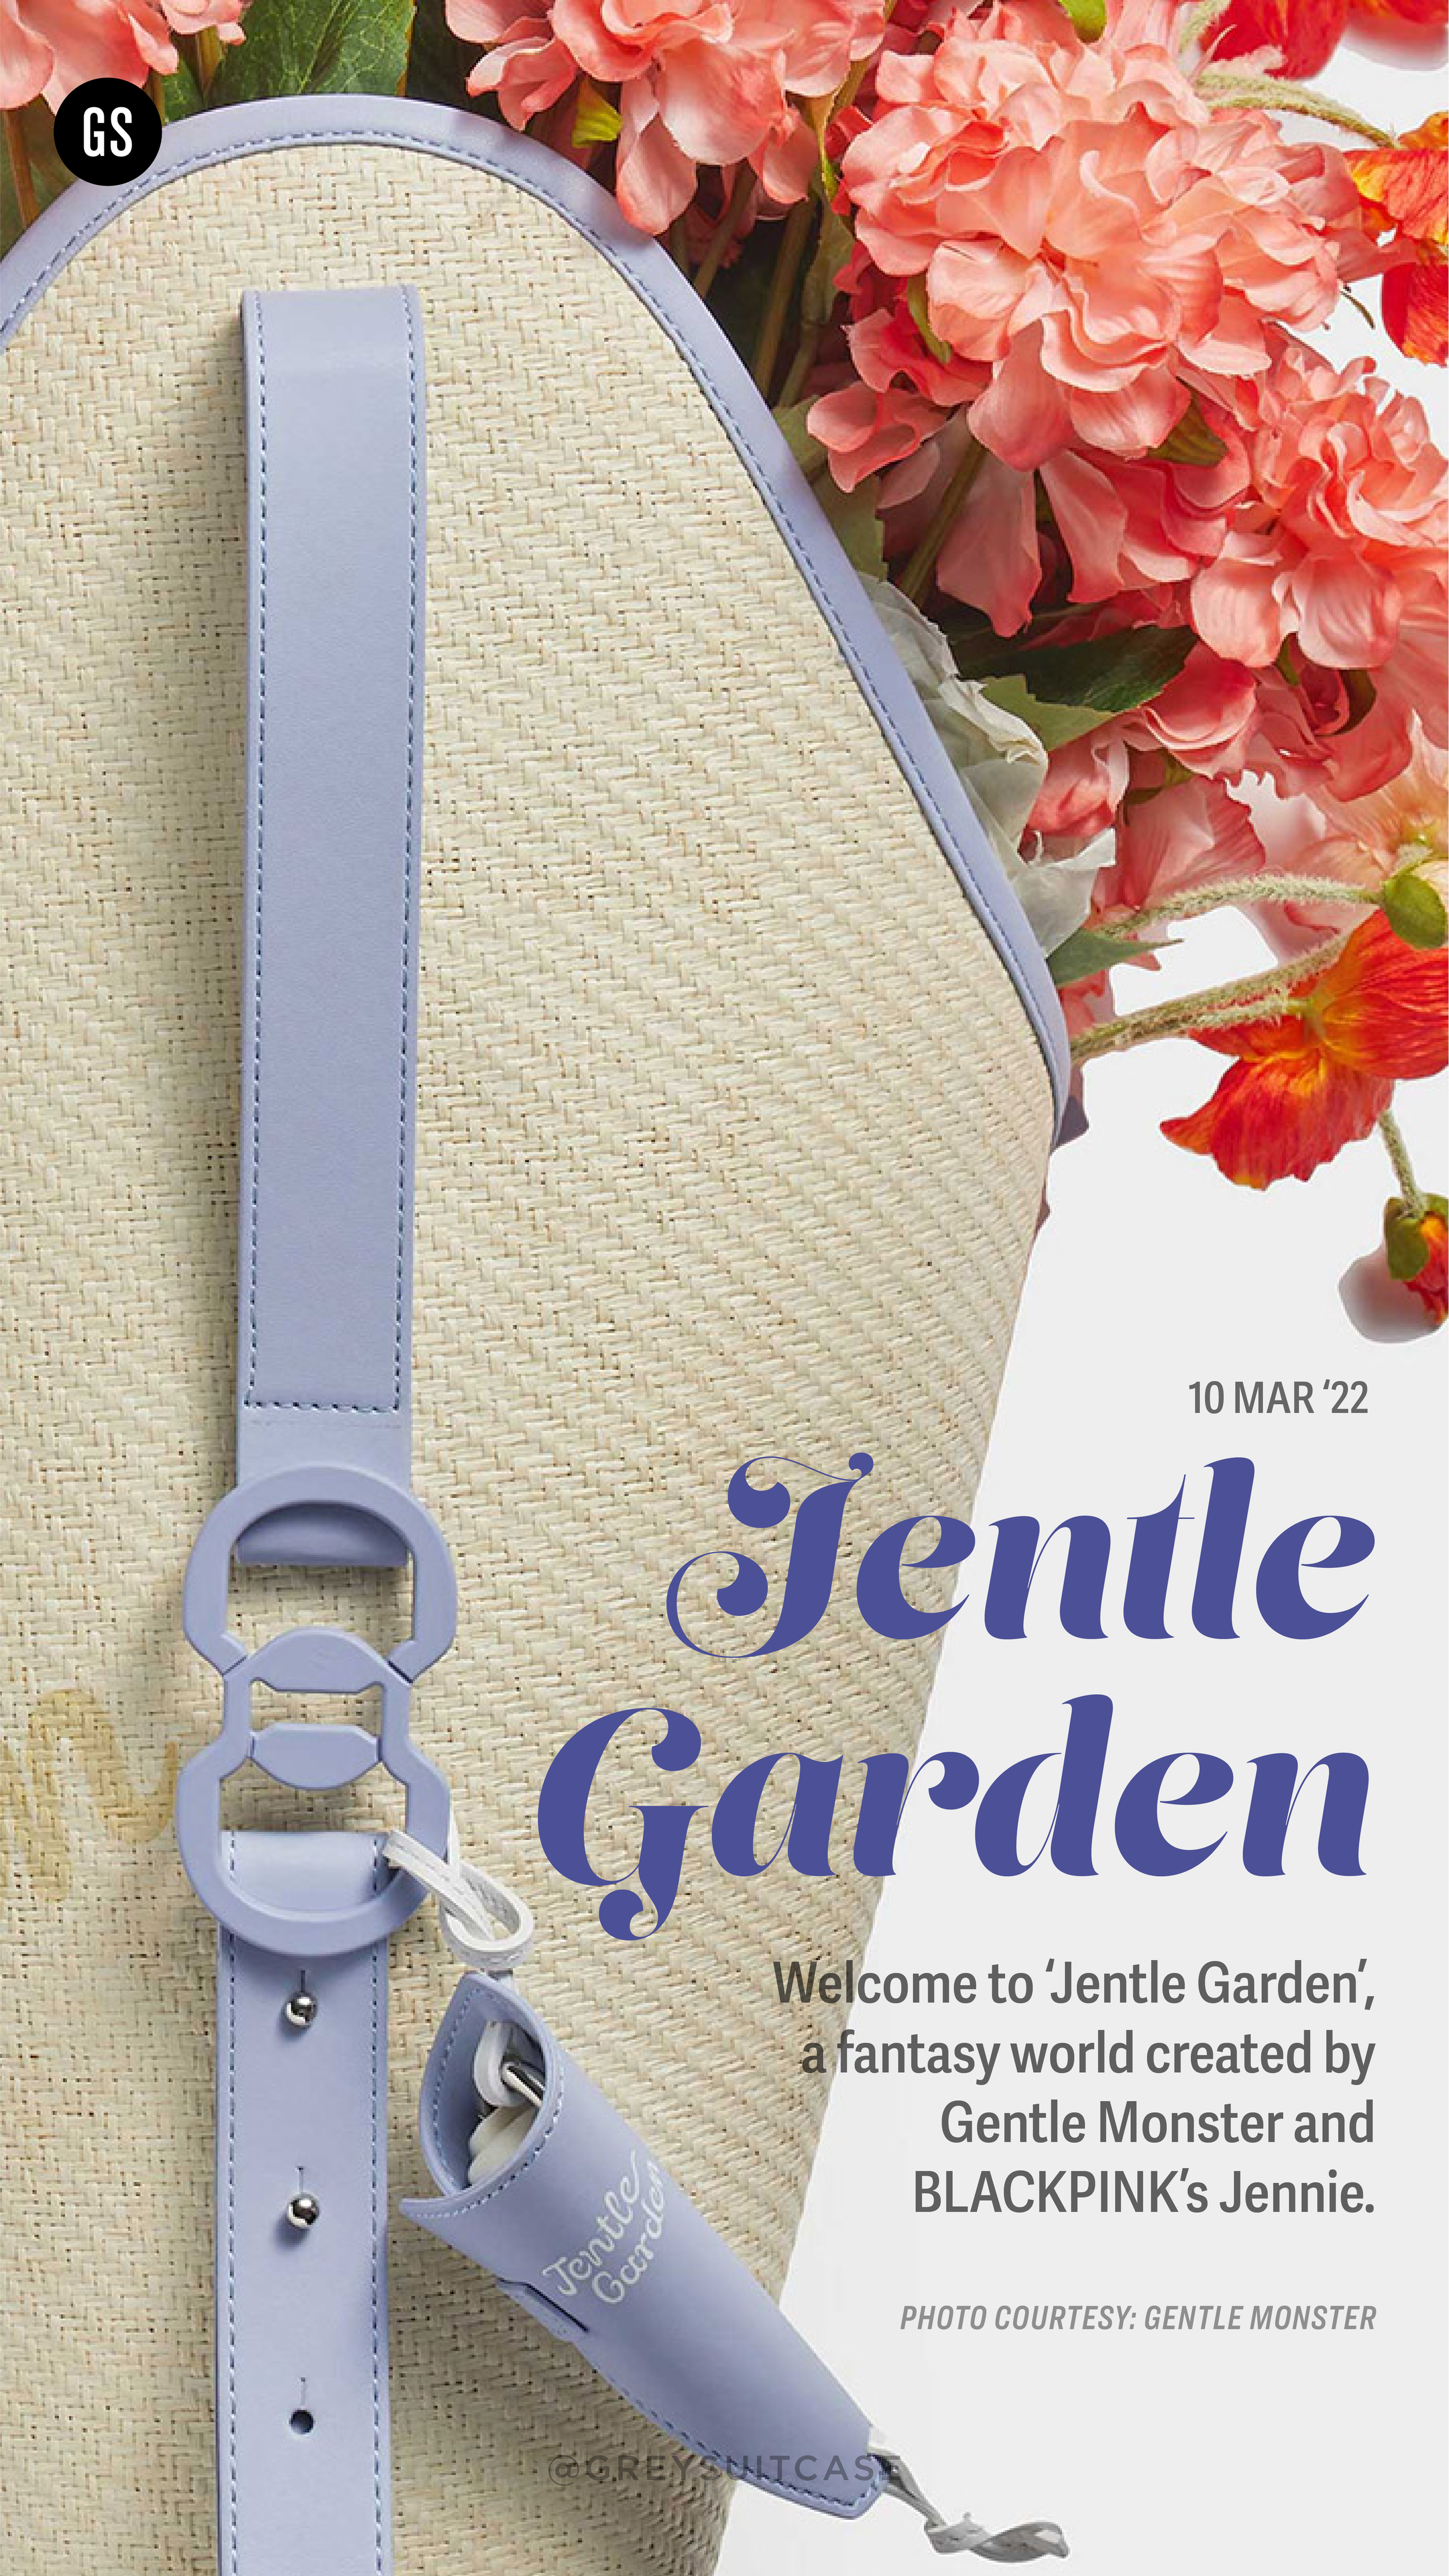 Unboxing Jentle Garden Cloudy Day 02